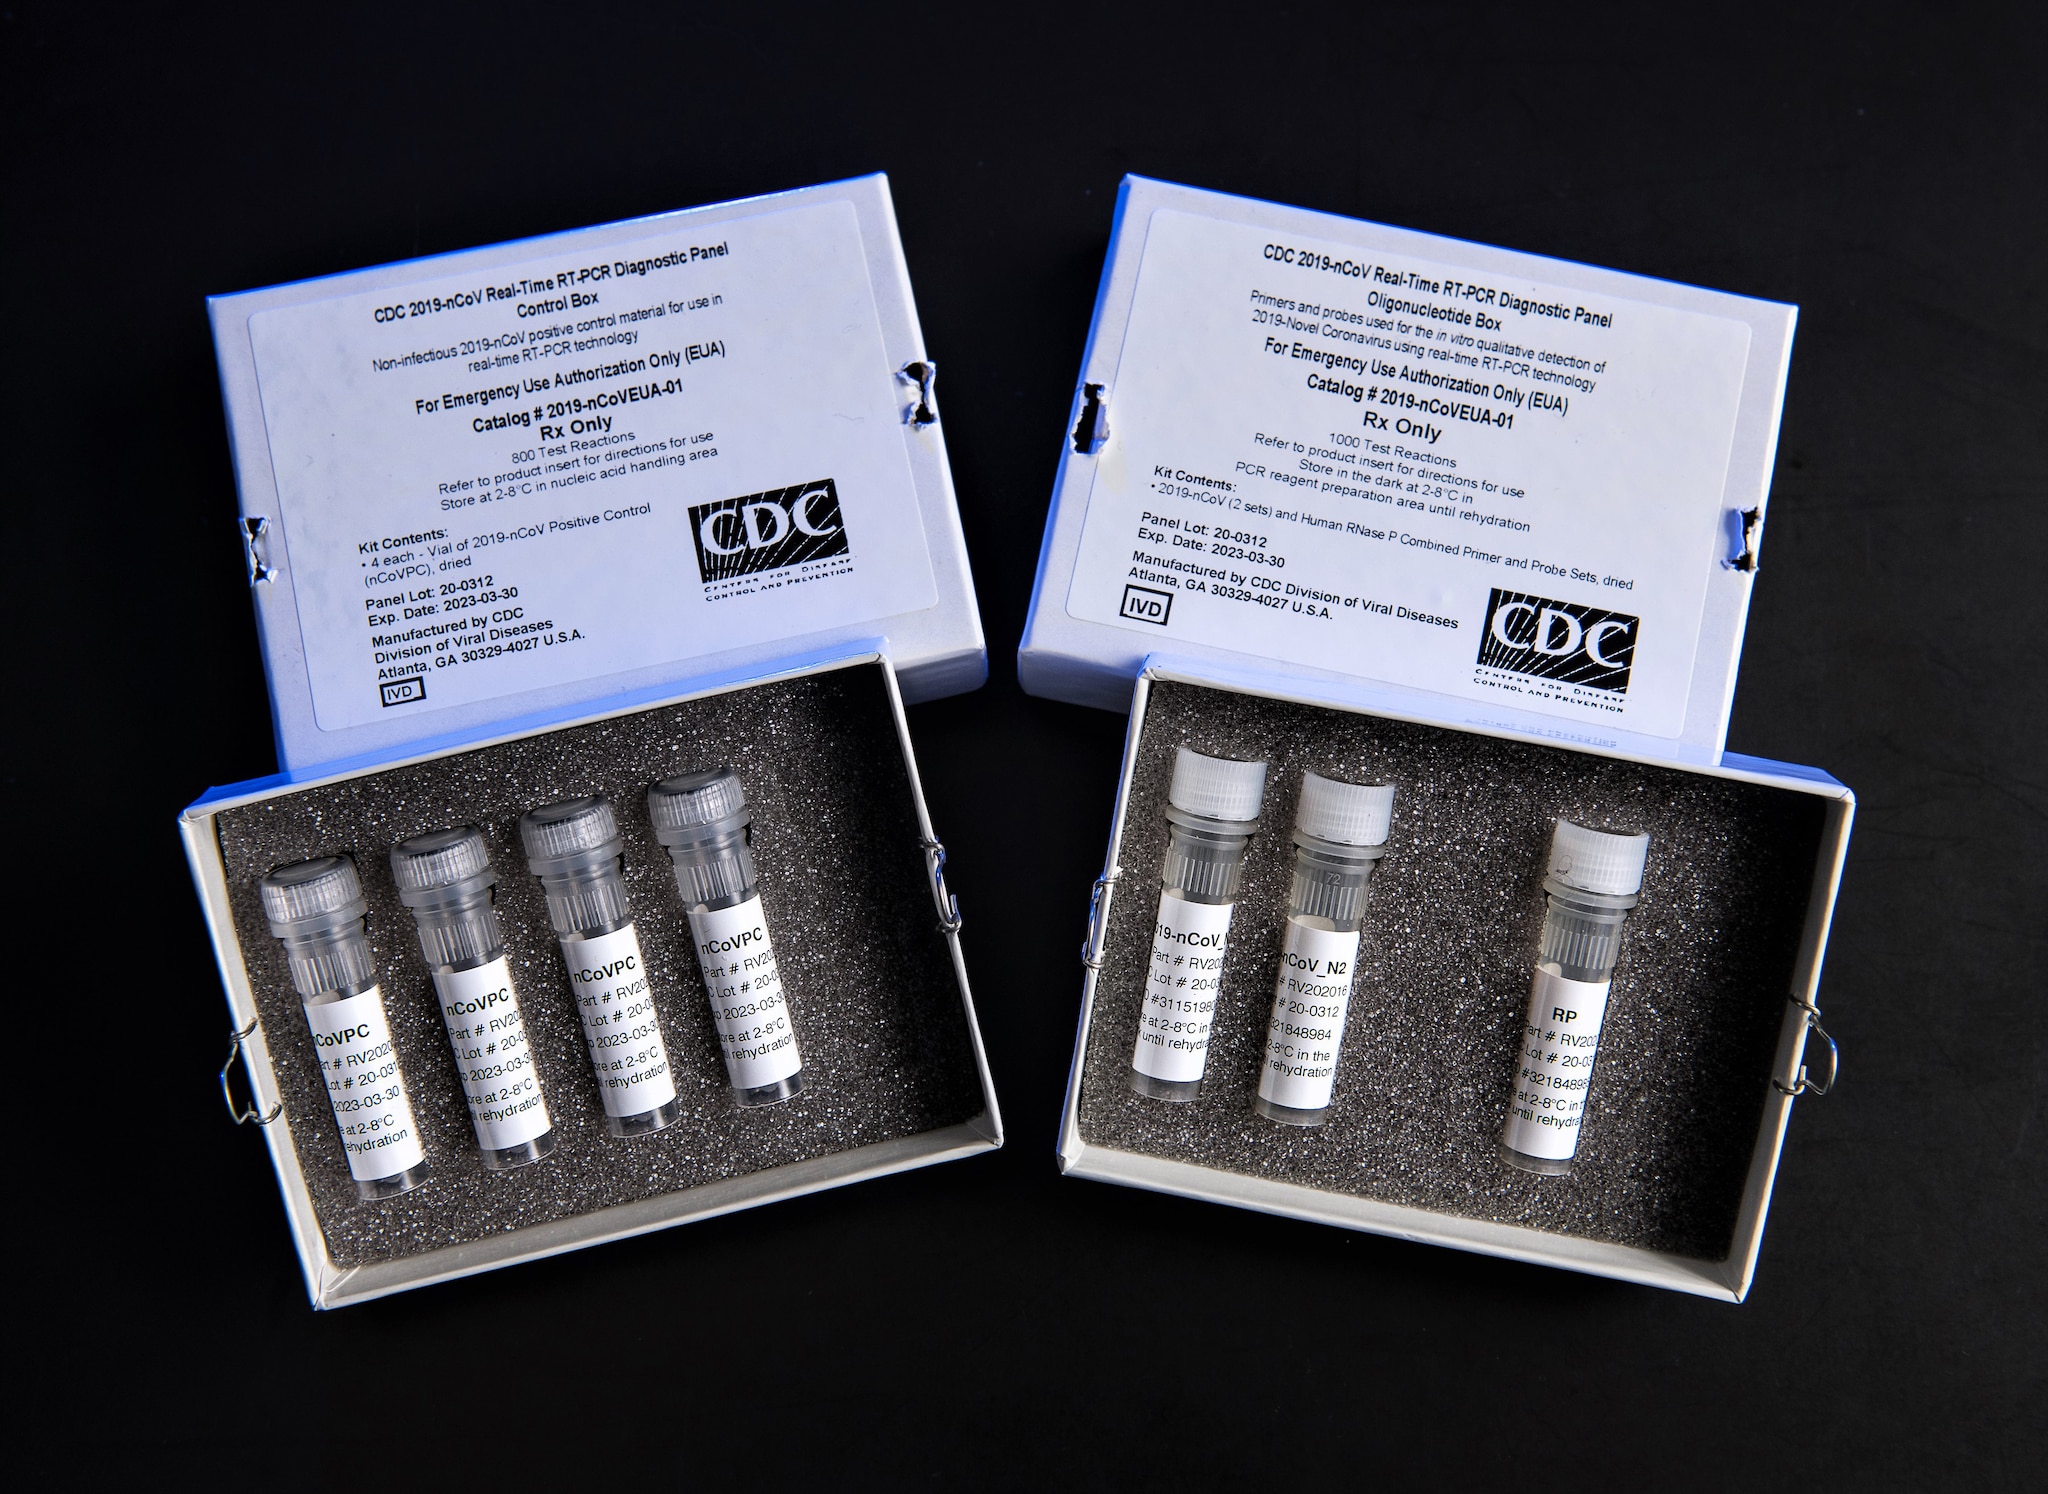 This is a picture of CDC’s laboratory test kit for severe acute respiratory syndrome coronavirus 2 (SARS-CoV-2). CDC tests are provided to U.S. state and local public health laboratories, Department of Defense (DoD) laboratories.